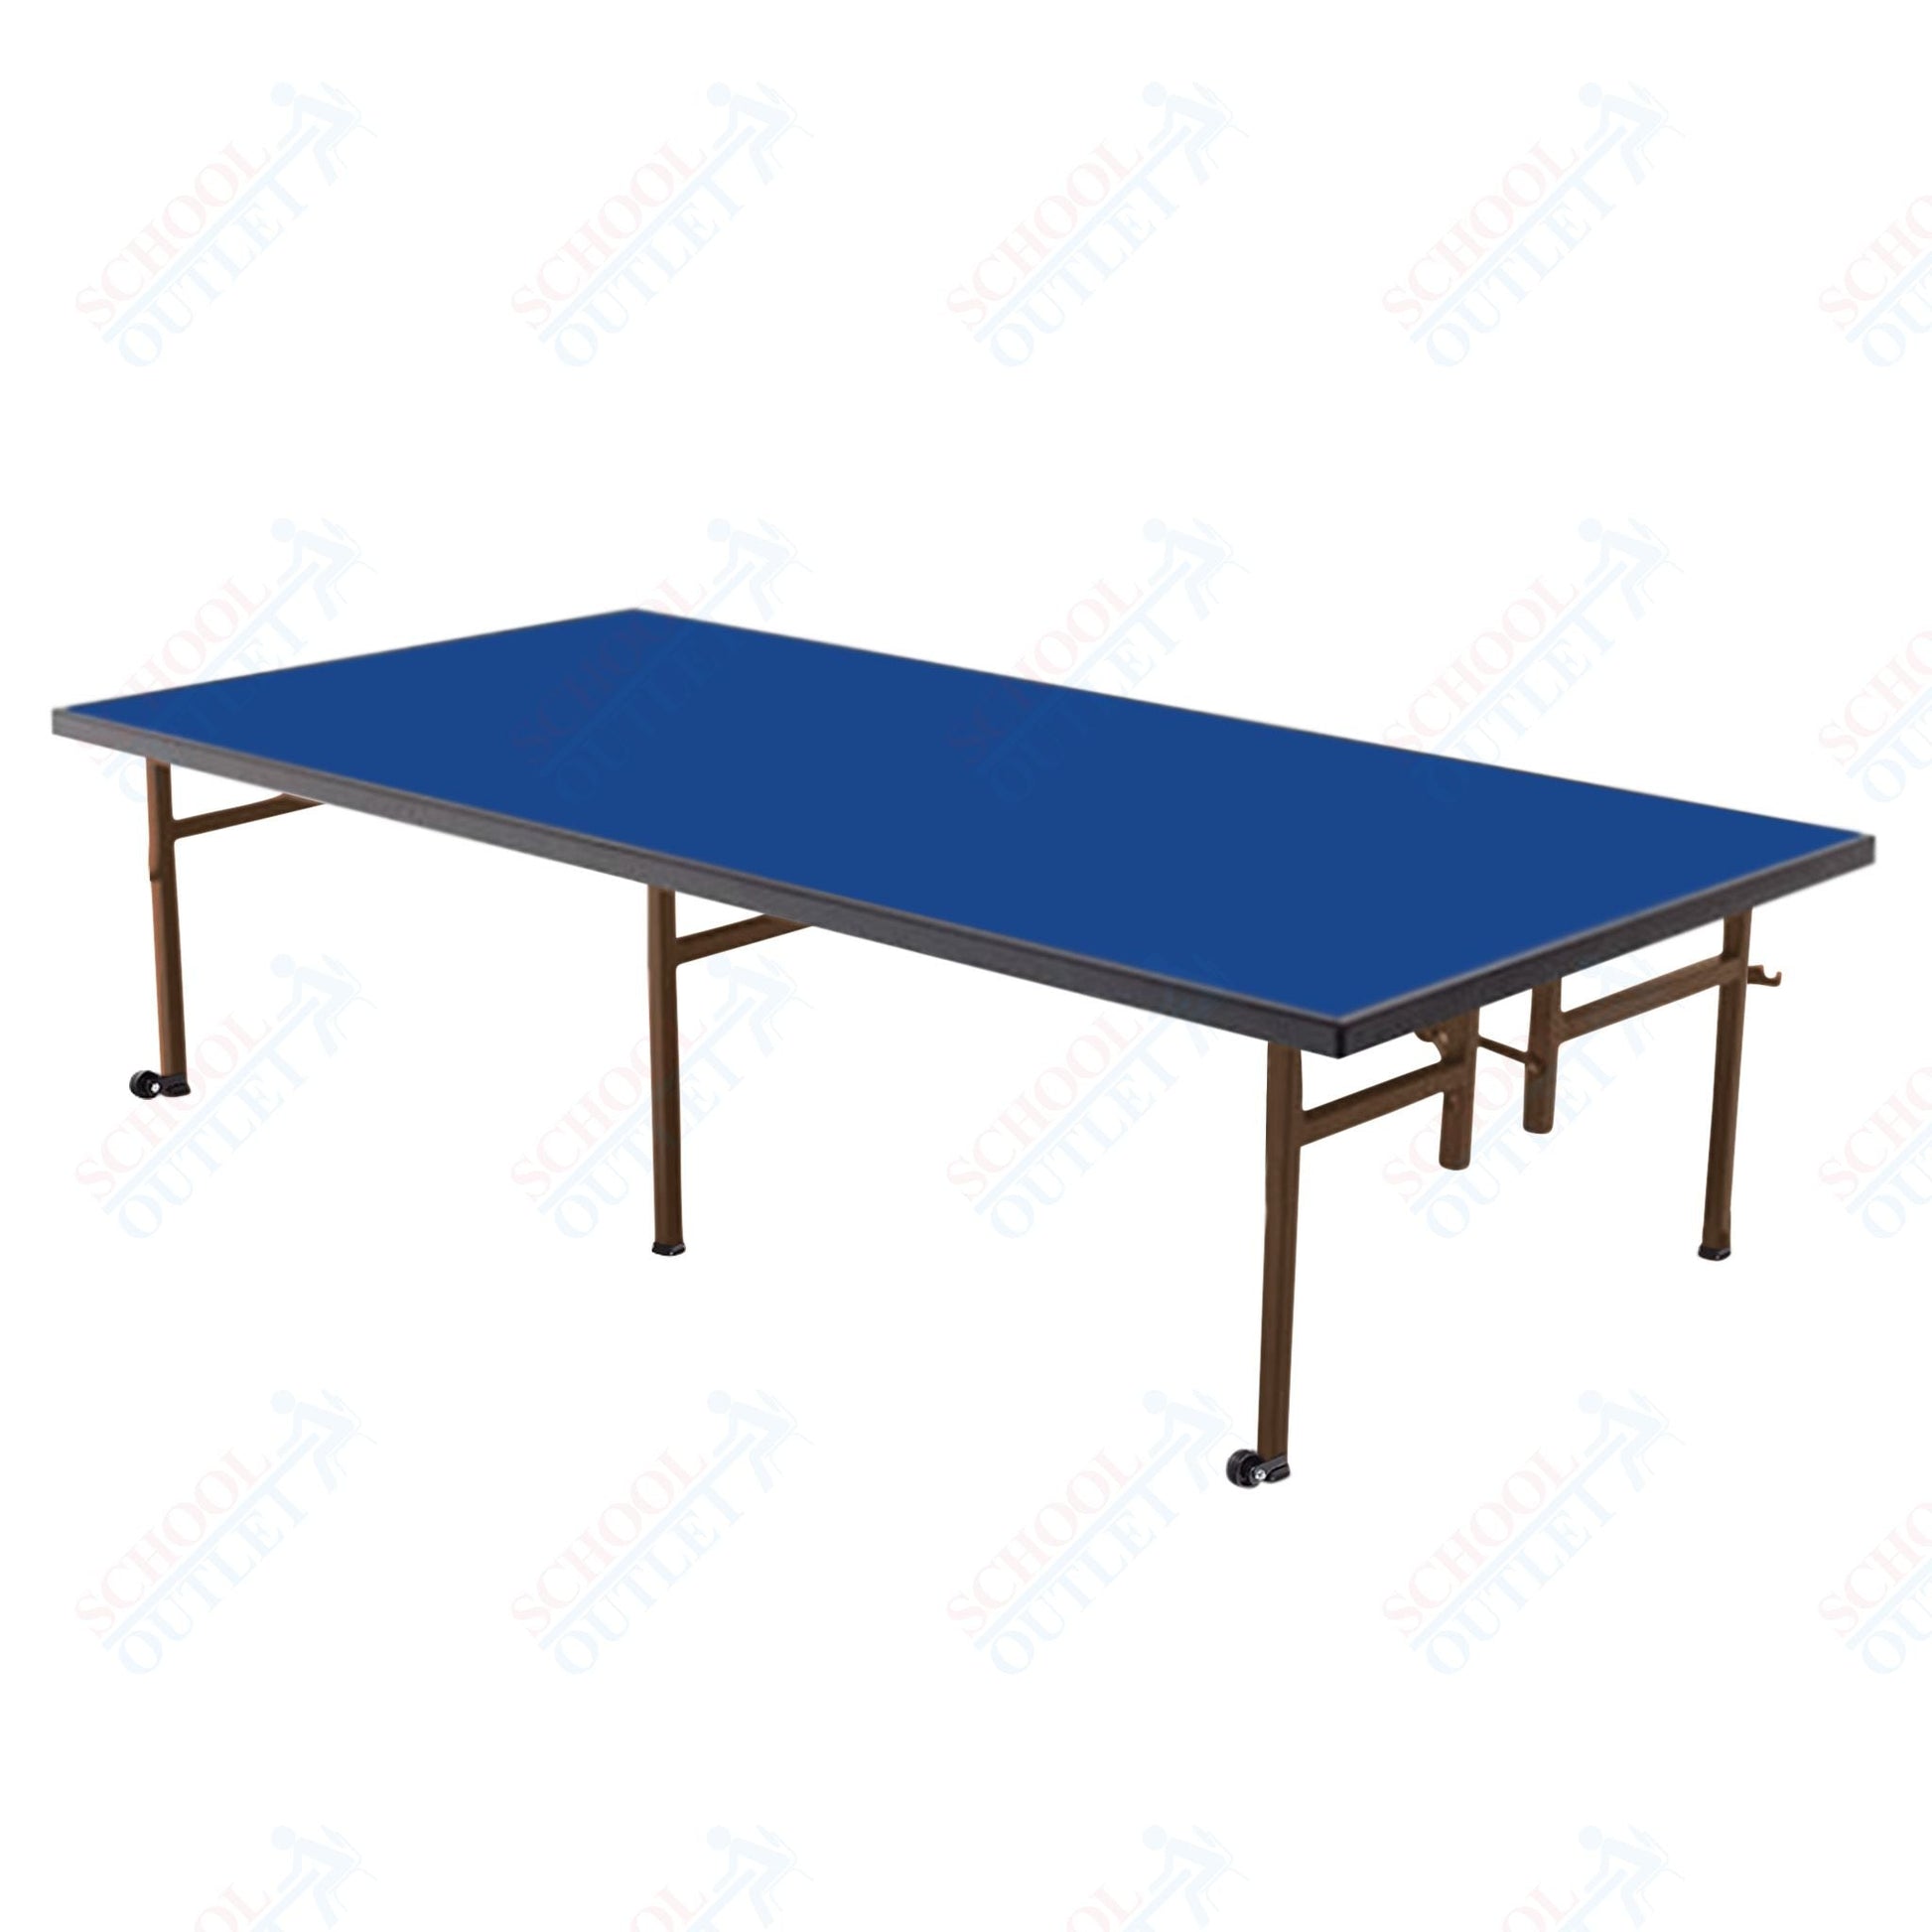 AmTab Fixed Height Stage - Carpet Top - 48"W x 96"L x 24"H (AmTab AMT - ST4824C) - SchoolOutlet